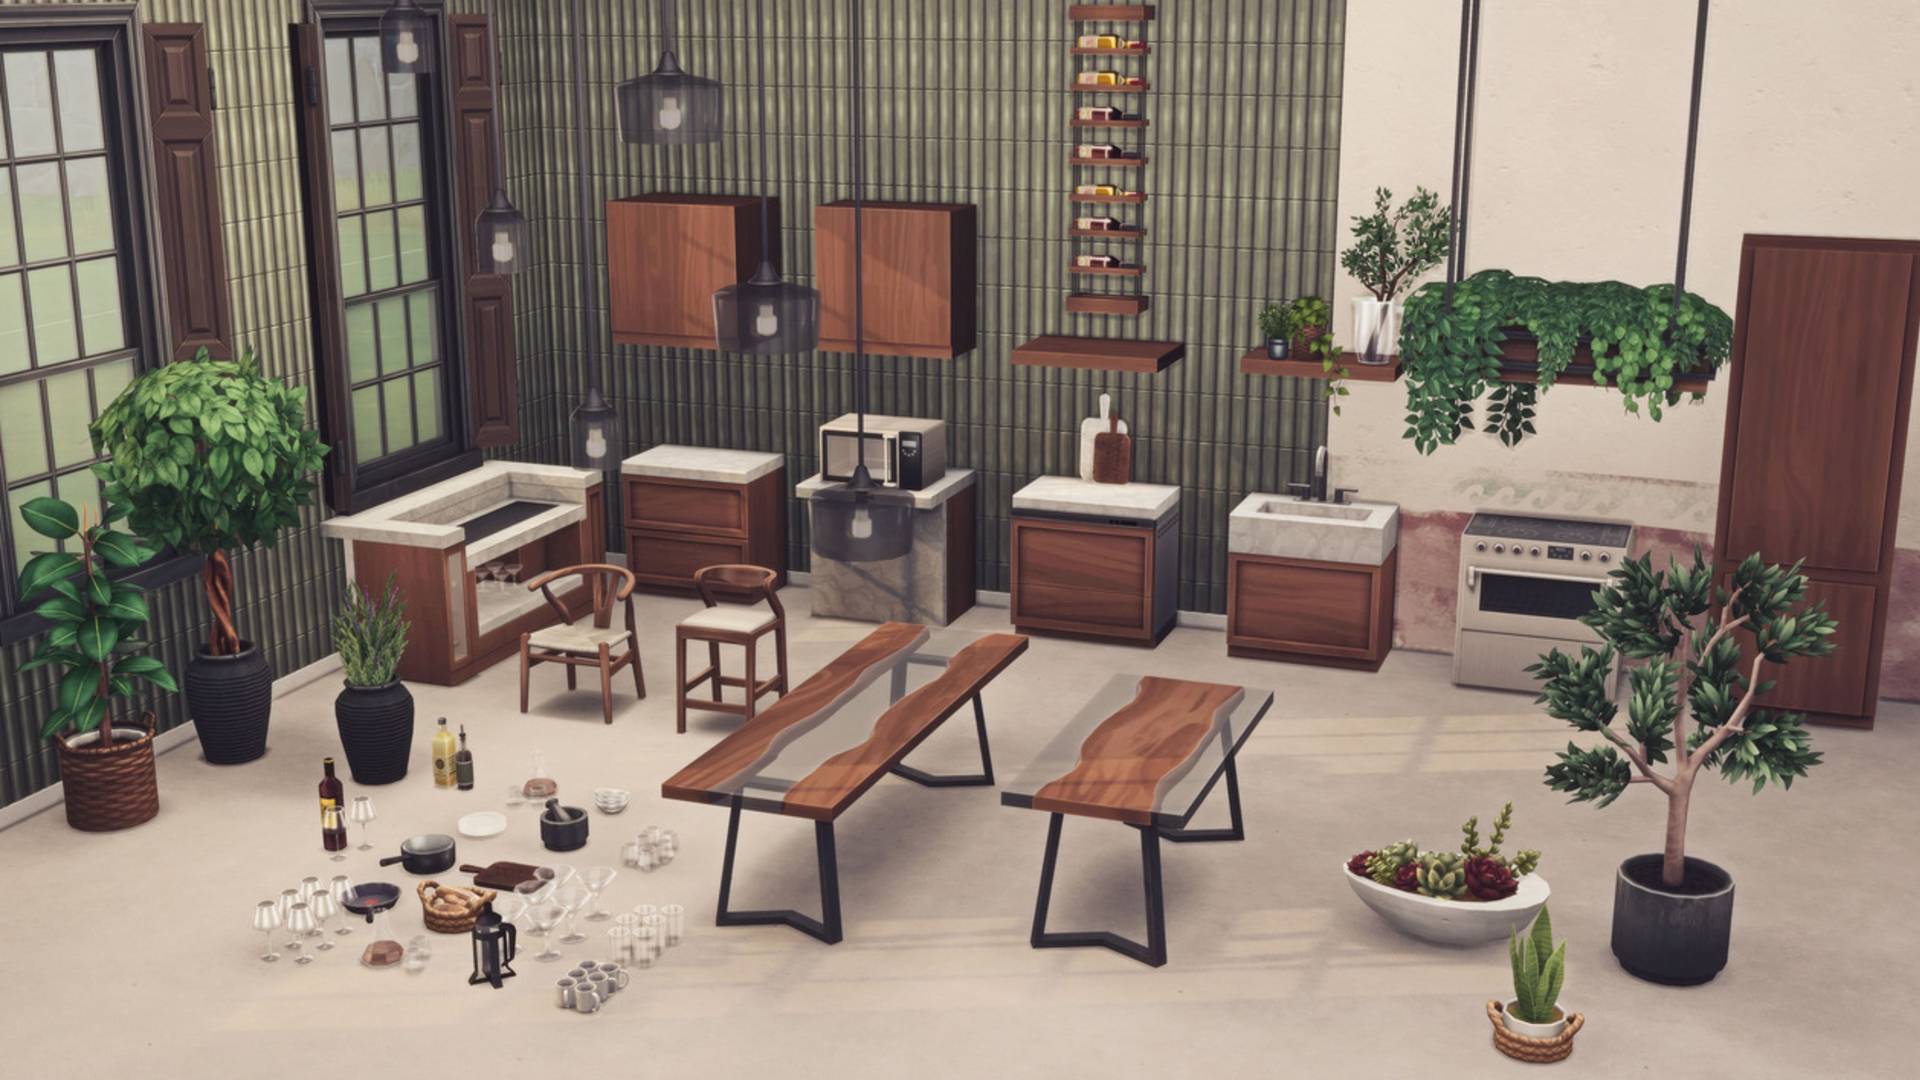 Sims 4 CC: A set of themed custom kitchen items for a house, including wine glasses, bar tops, units, and plants.